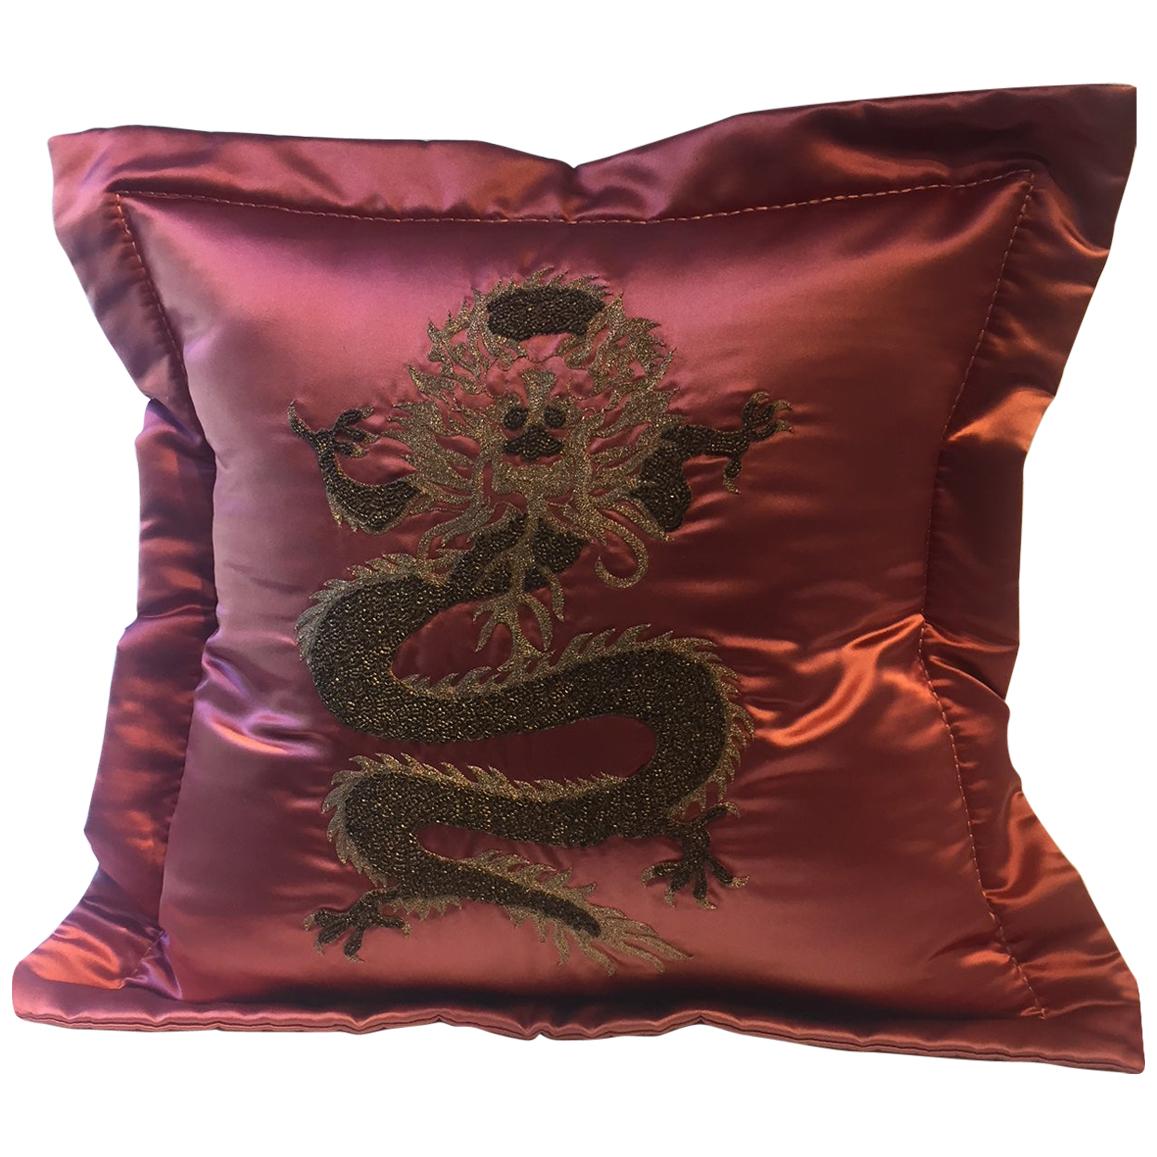 Dragon Design Cushion Silk Color Strawberry Red Hand Embroidery For Sale